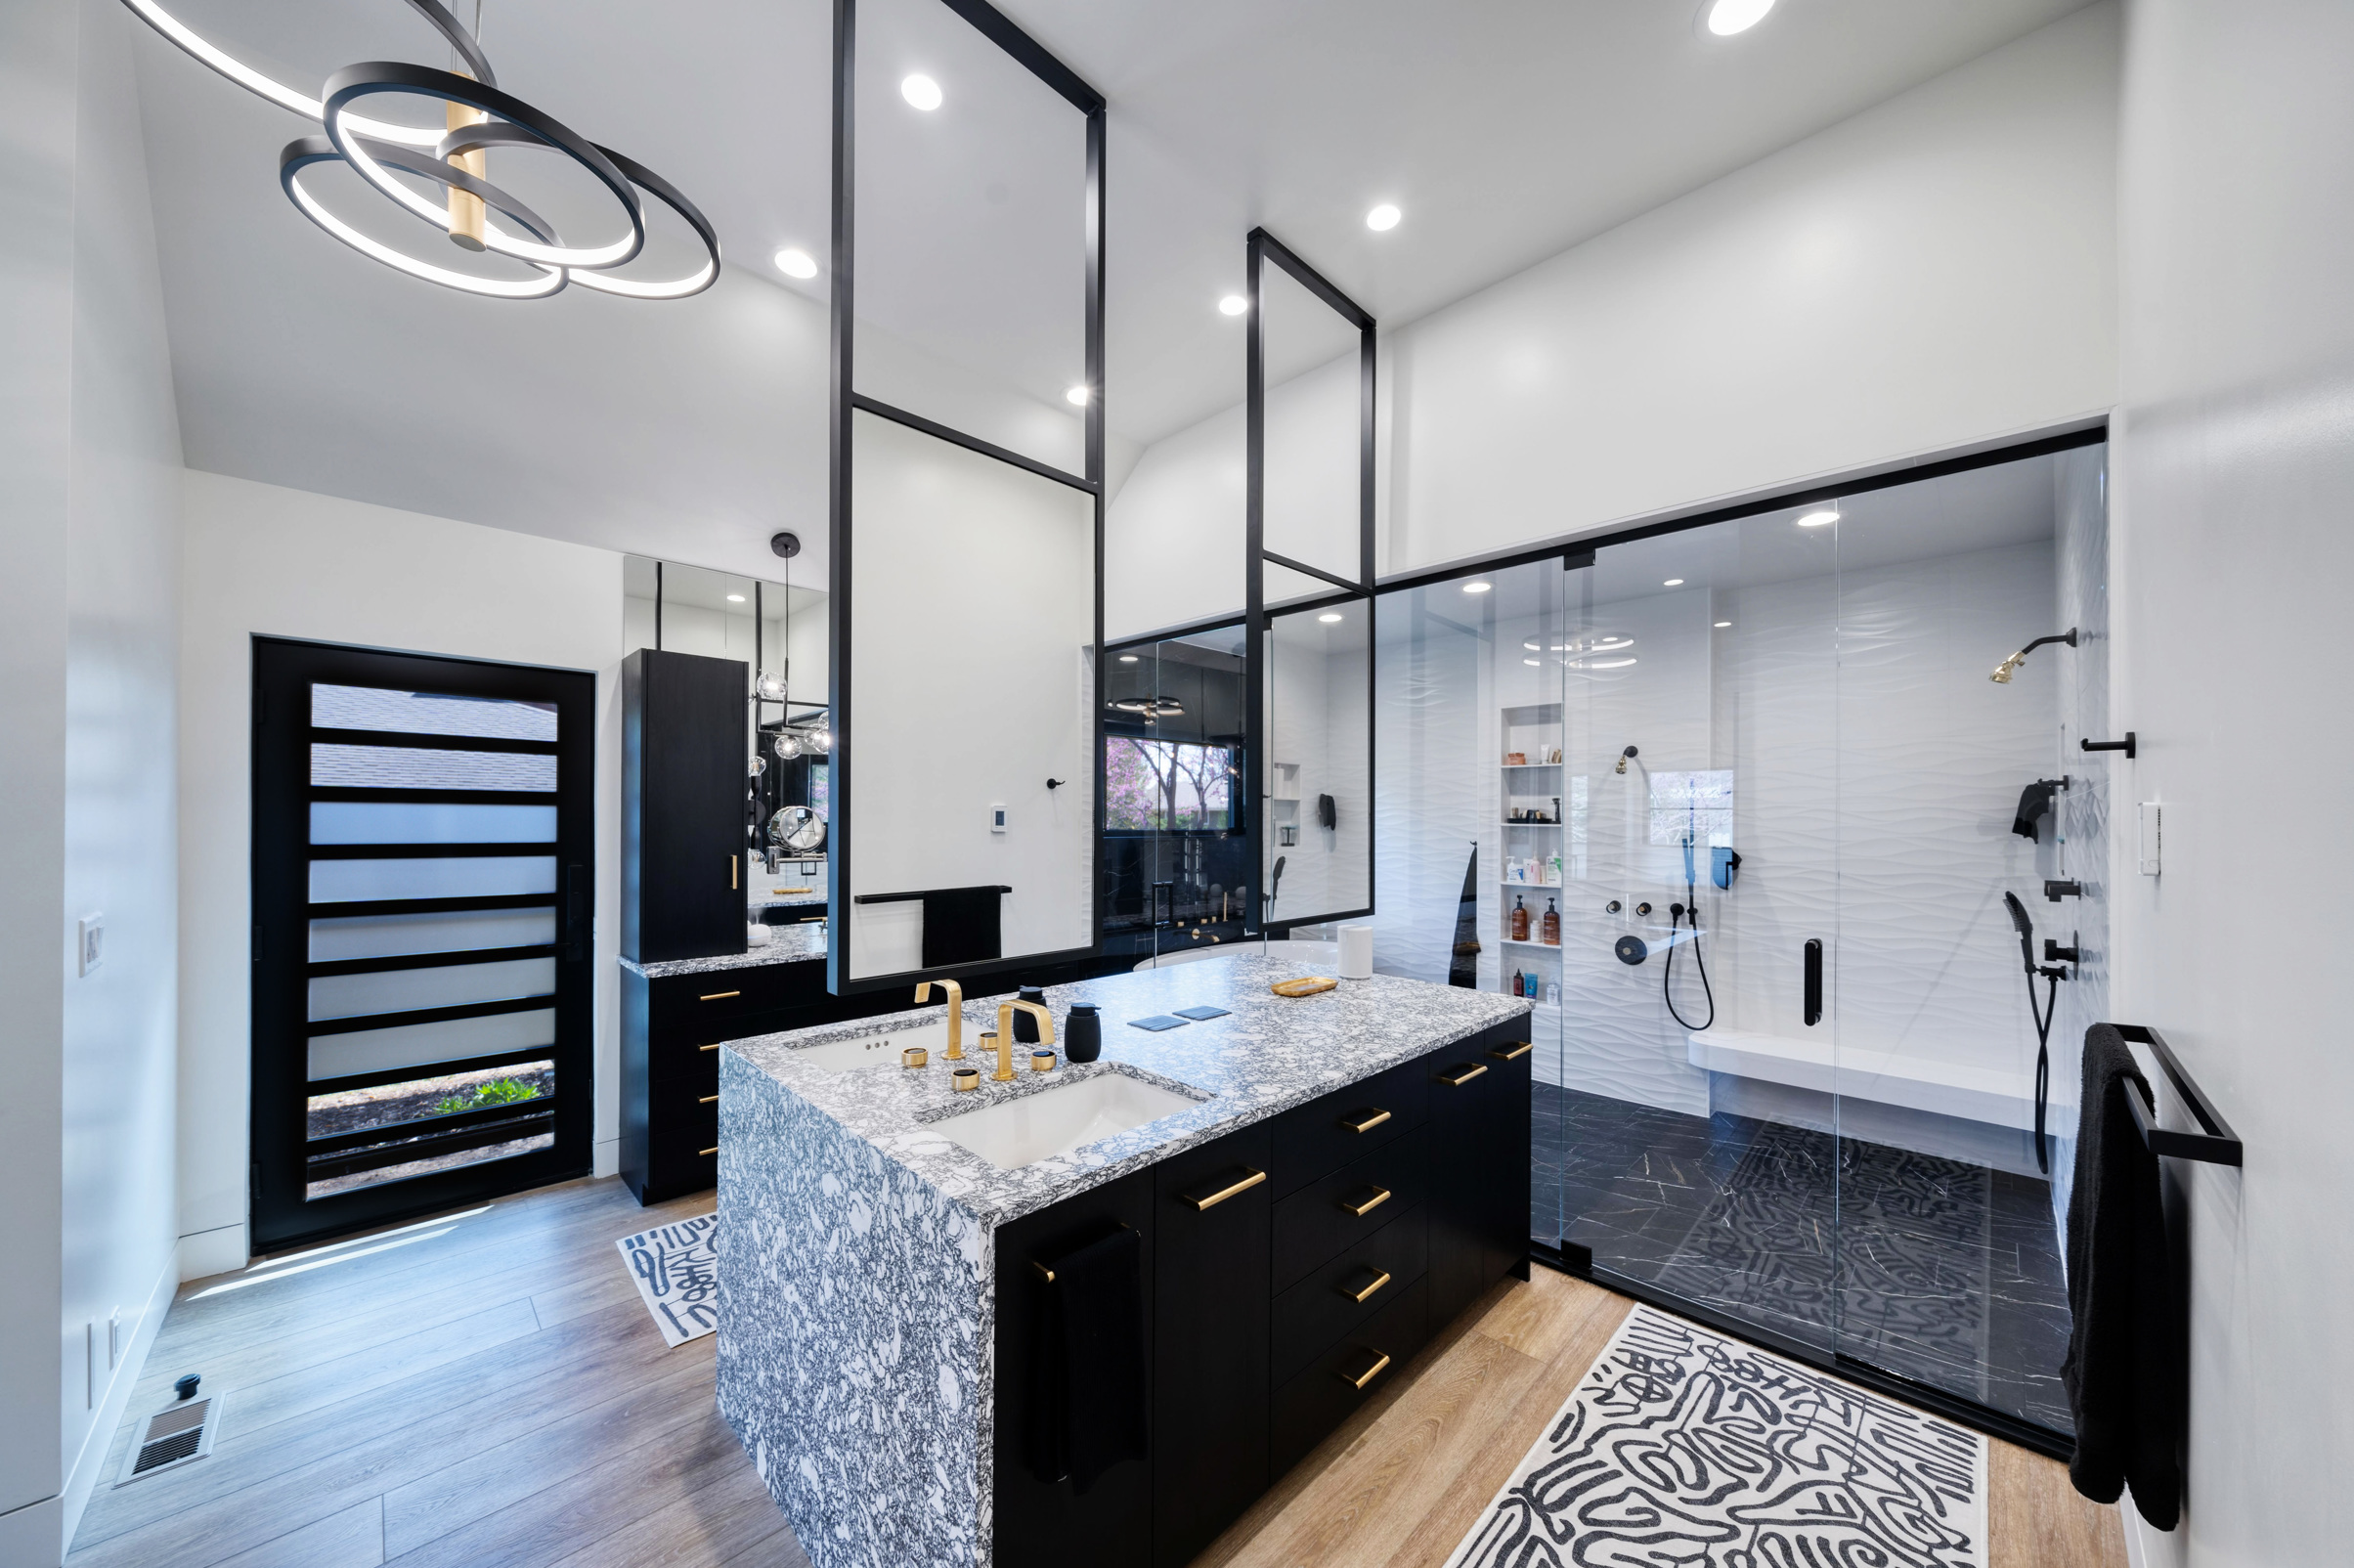 Remodeled bathroom with dark cabinetry and light countertops with wood floors.